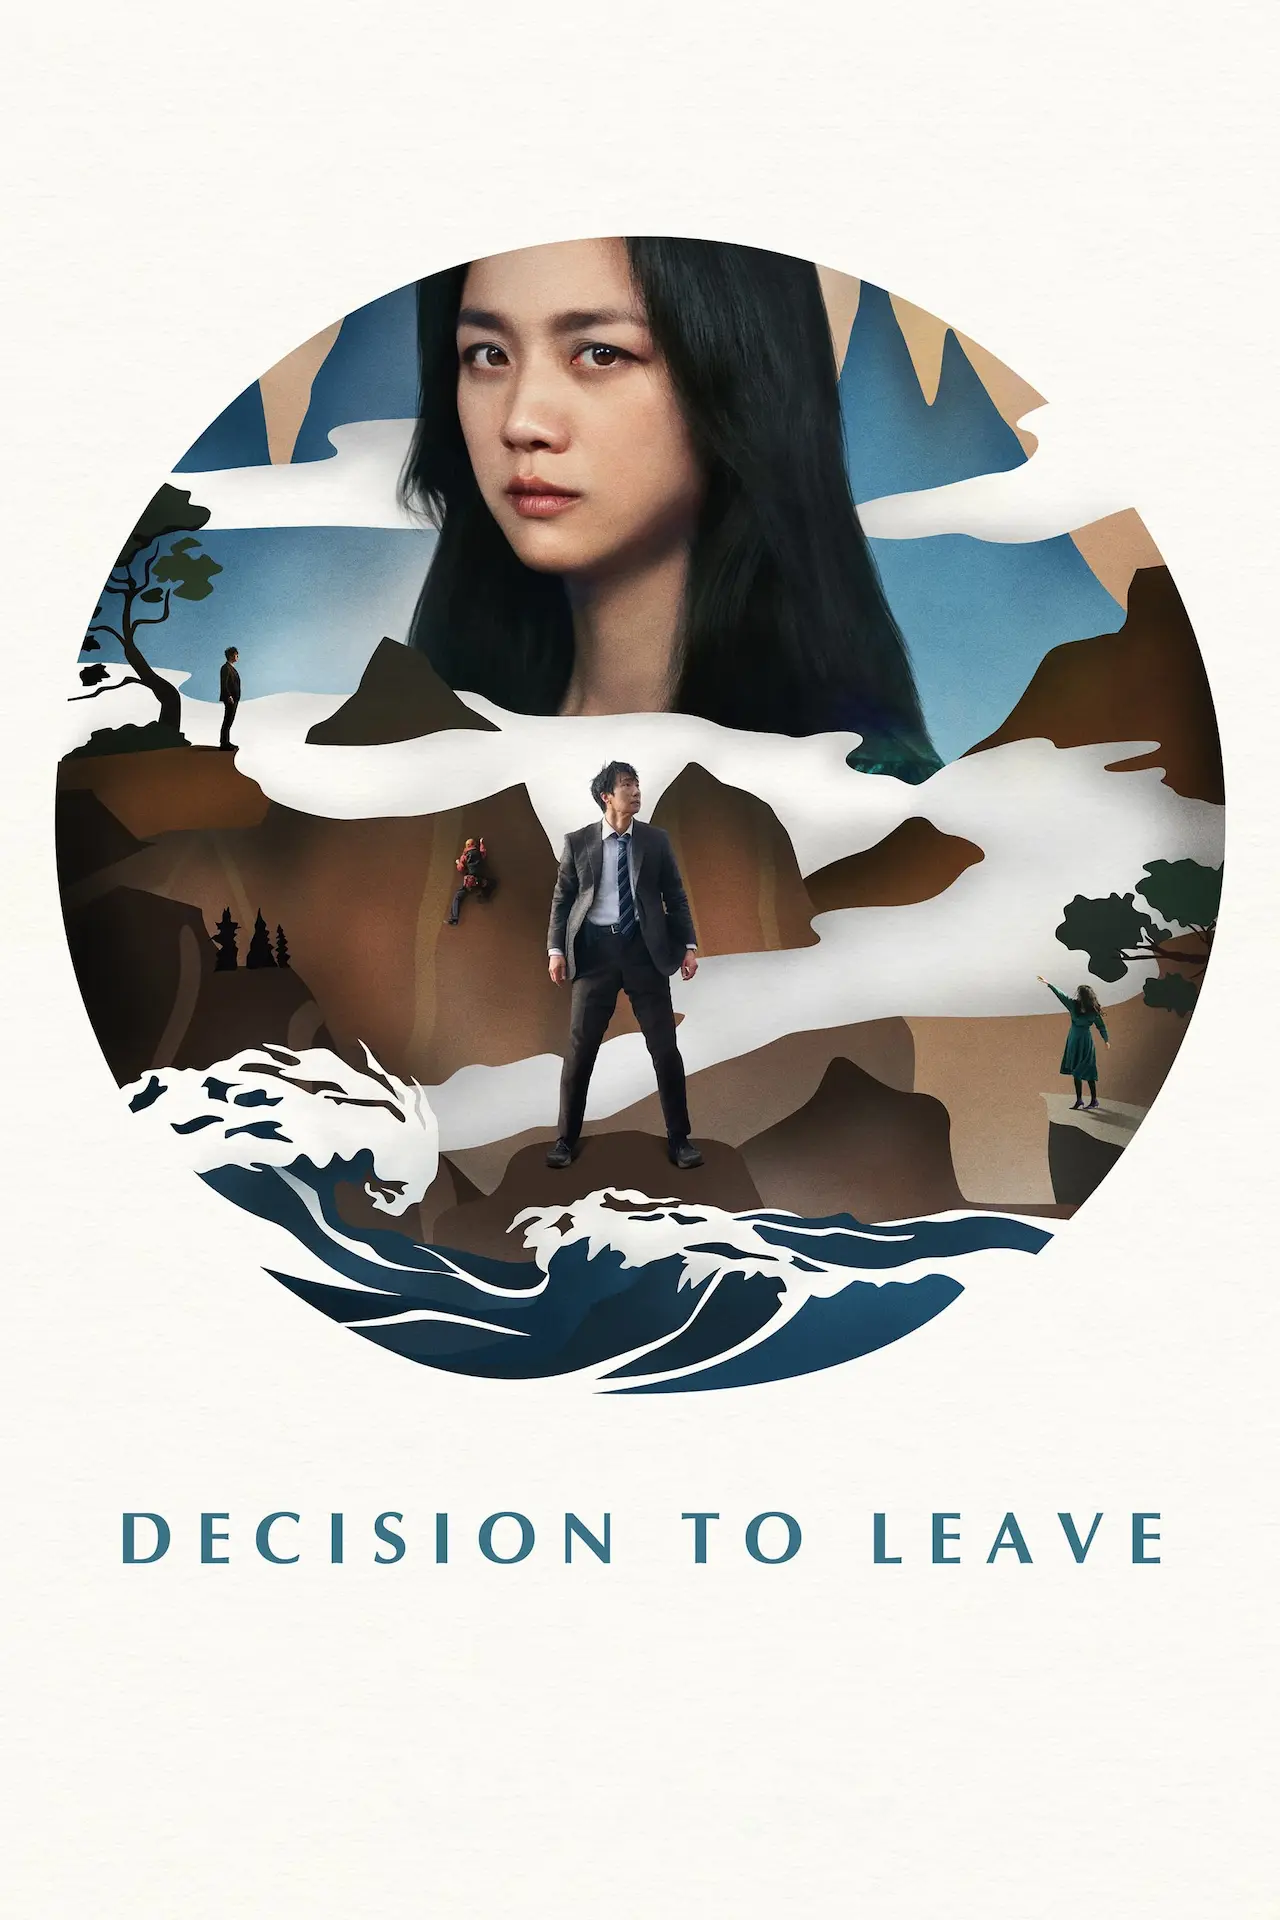 Poster for Decision to Leave, hand-drawn art of the film's two main characters, with mountains and the sea, in a circle on a white background.